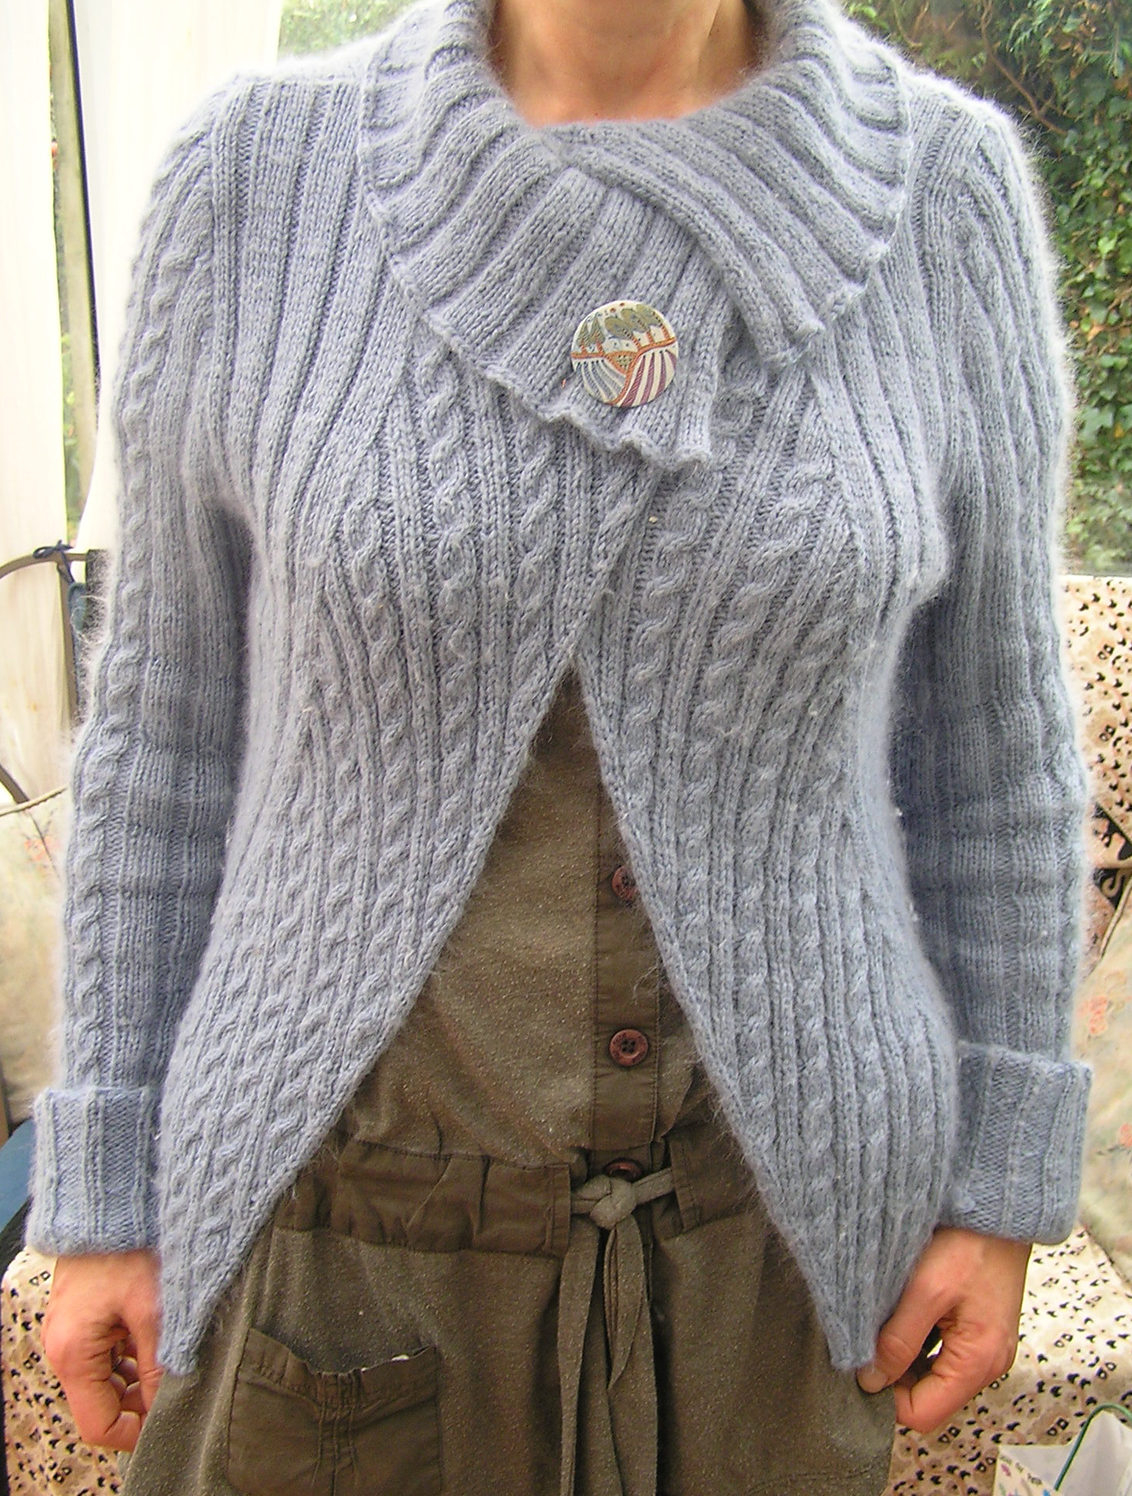 Free Knitting Patterns For Sweater Coats Wrap Cardigan Knitting Patterns In The Loop Knitting